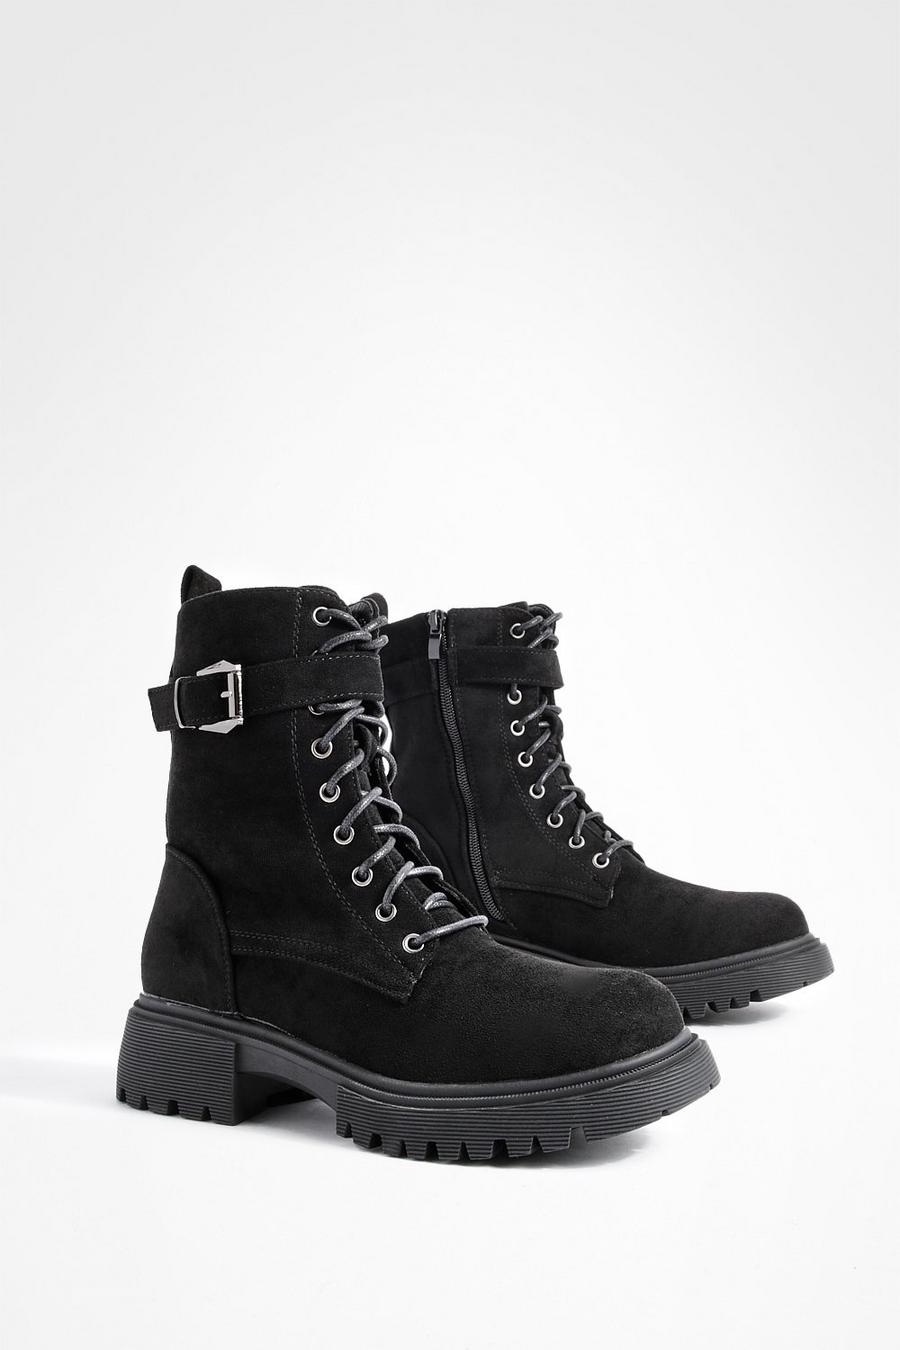 Black Buckle Chunky Combat Boots image number 1